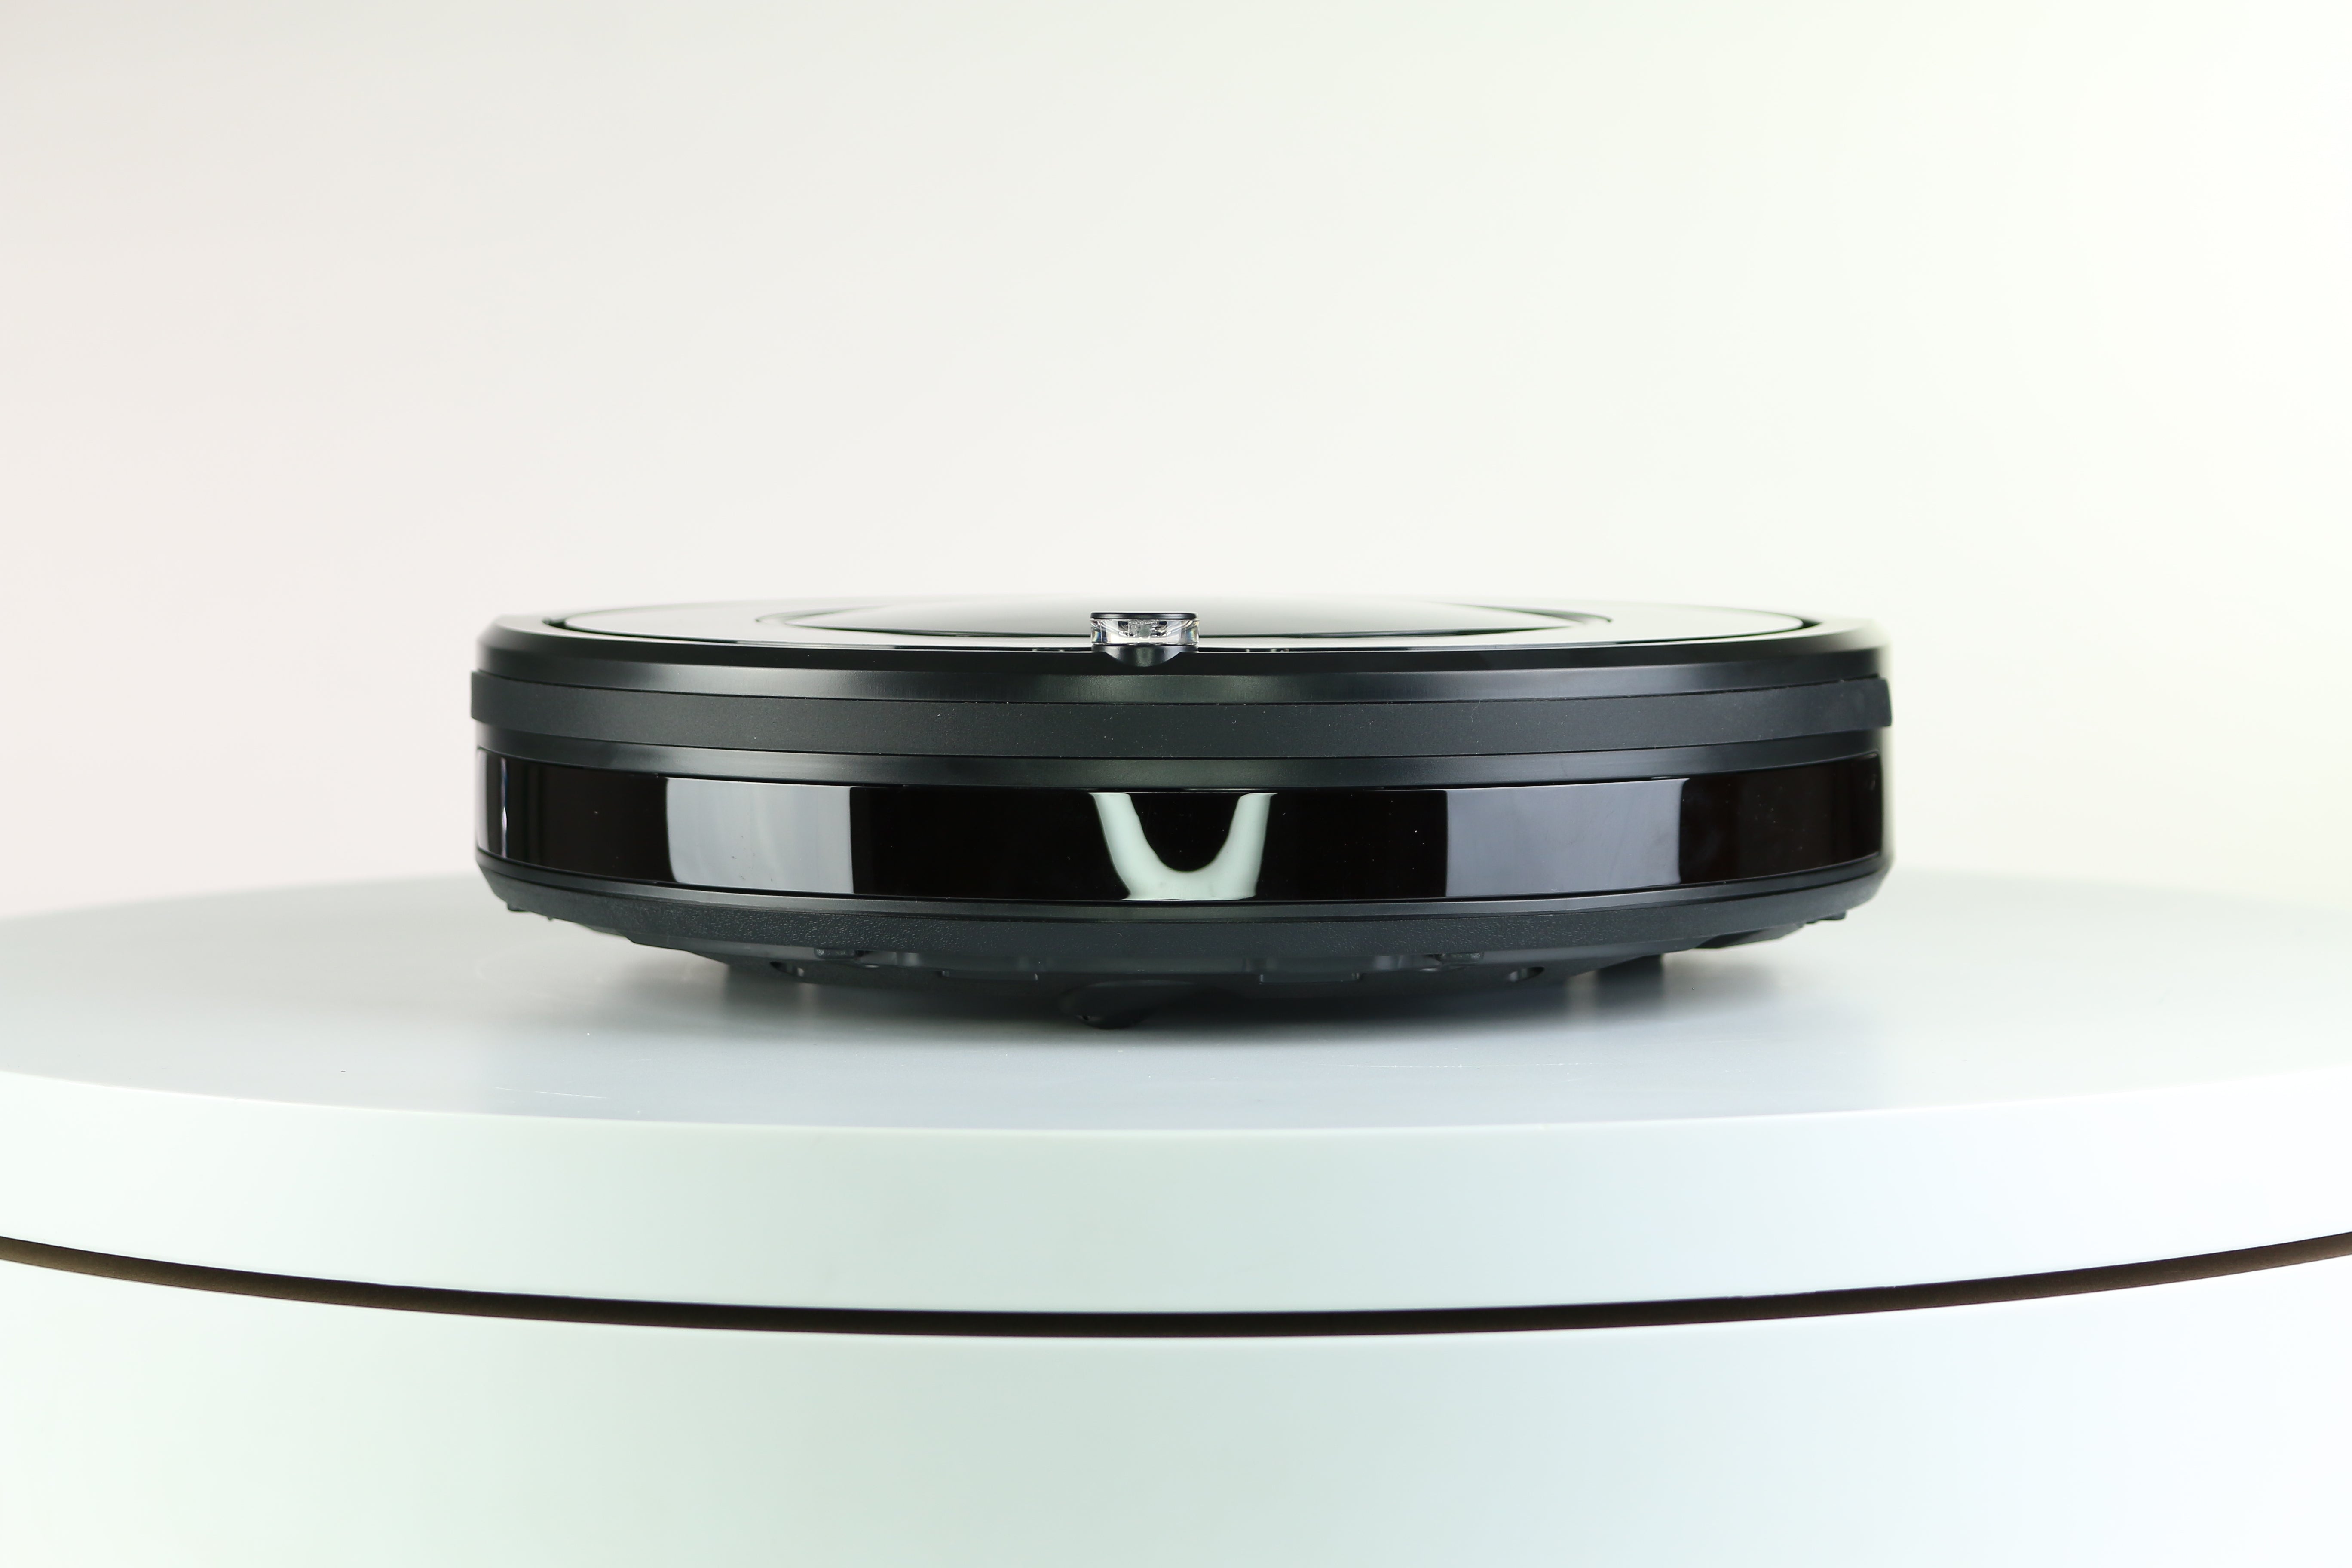 Veridian by CST  X310 Robot Vacuum Cleaner